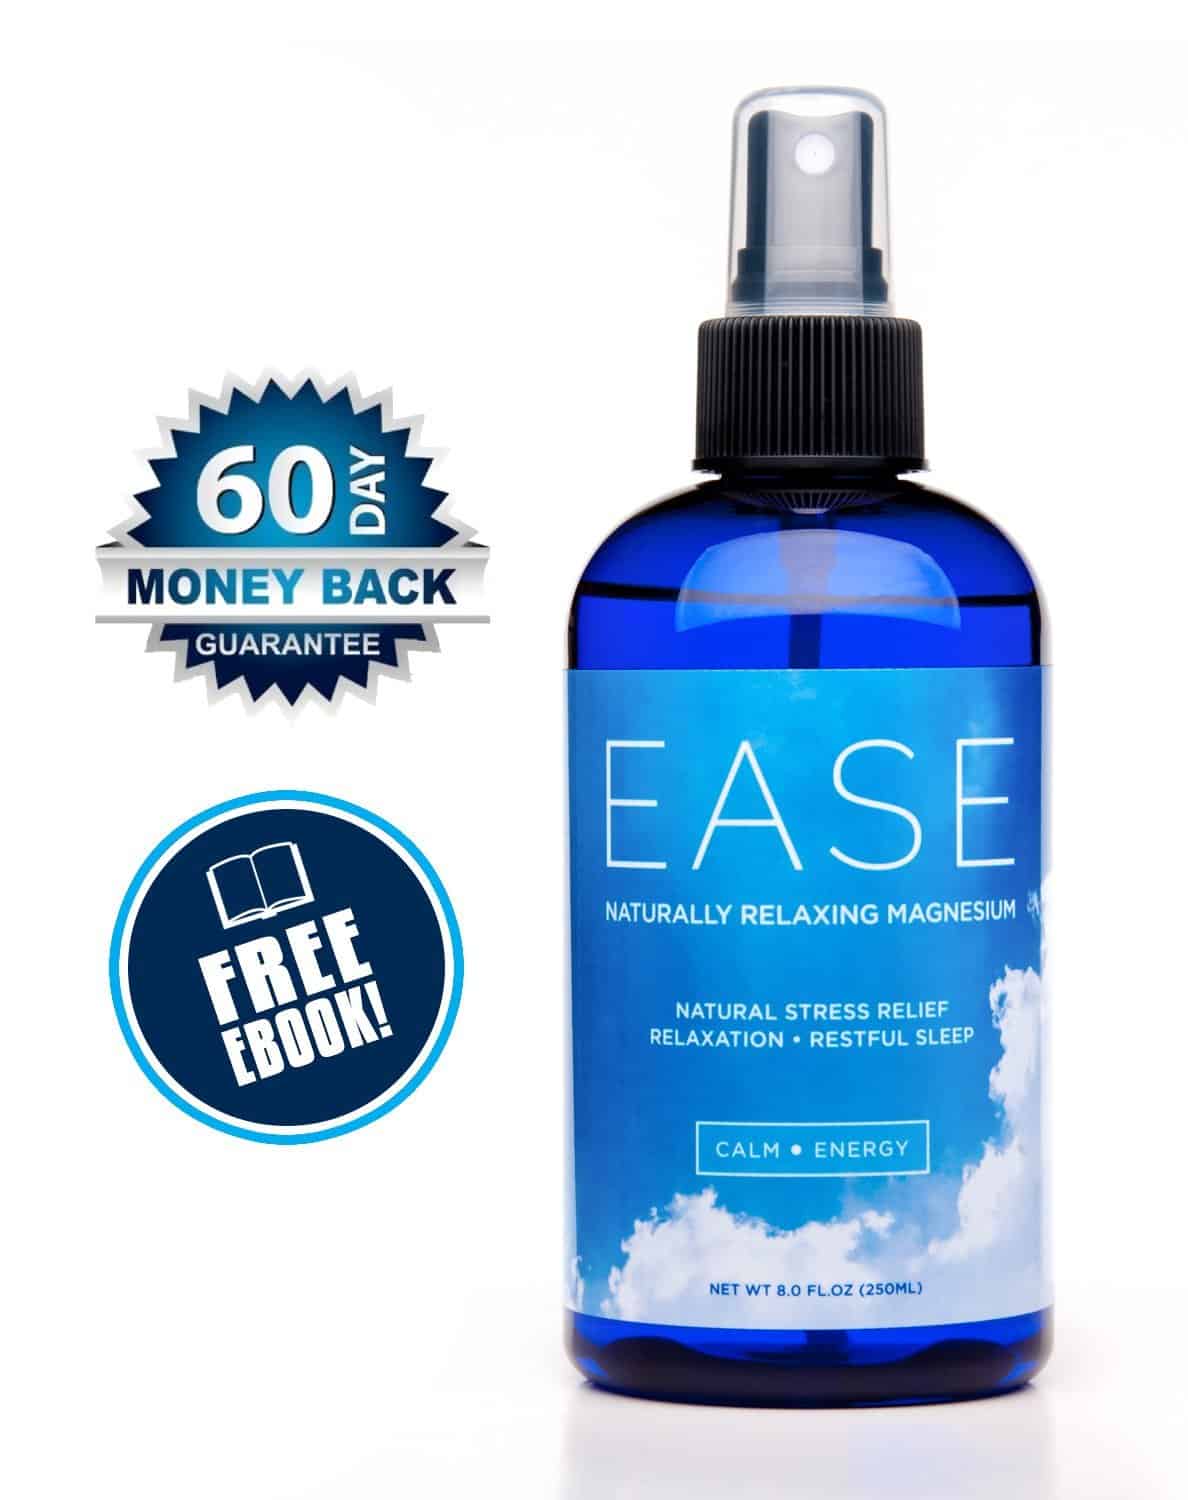 A bottle of ease is shown with the free coupon.